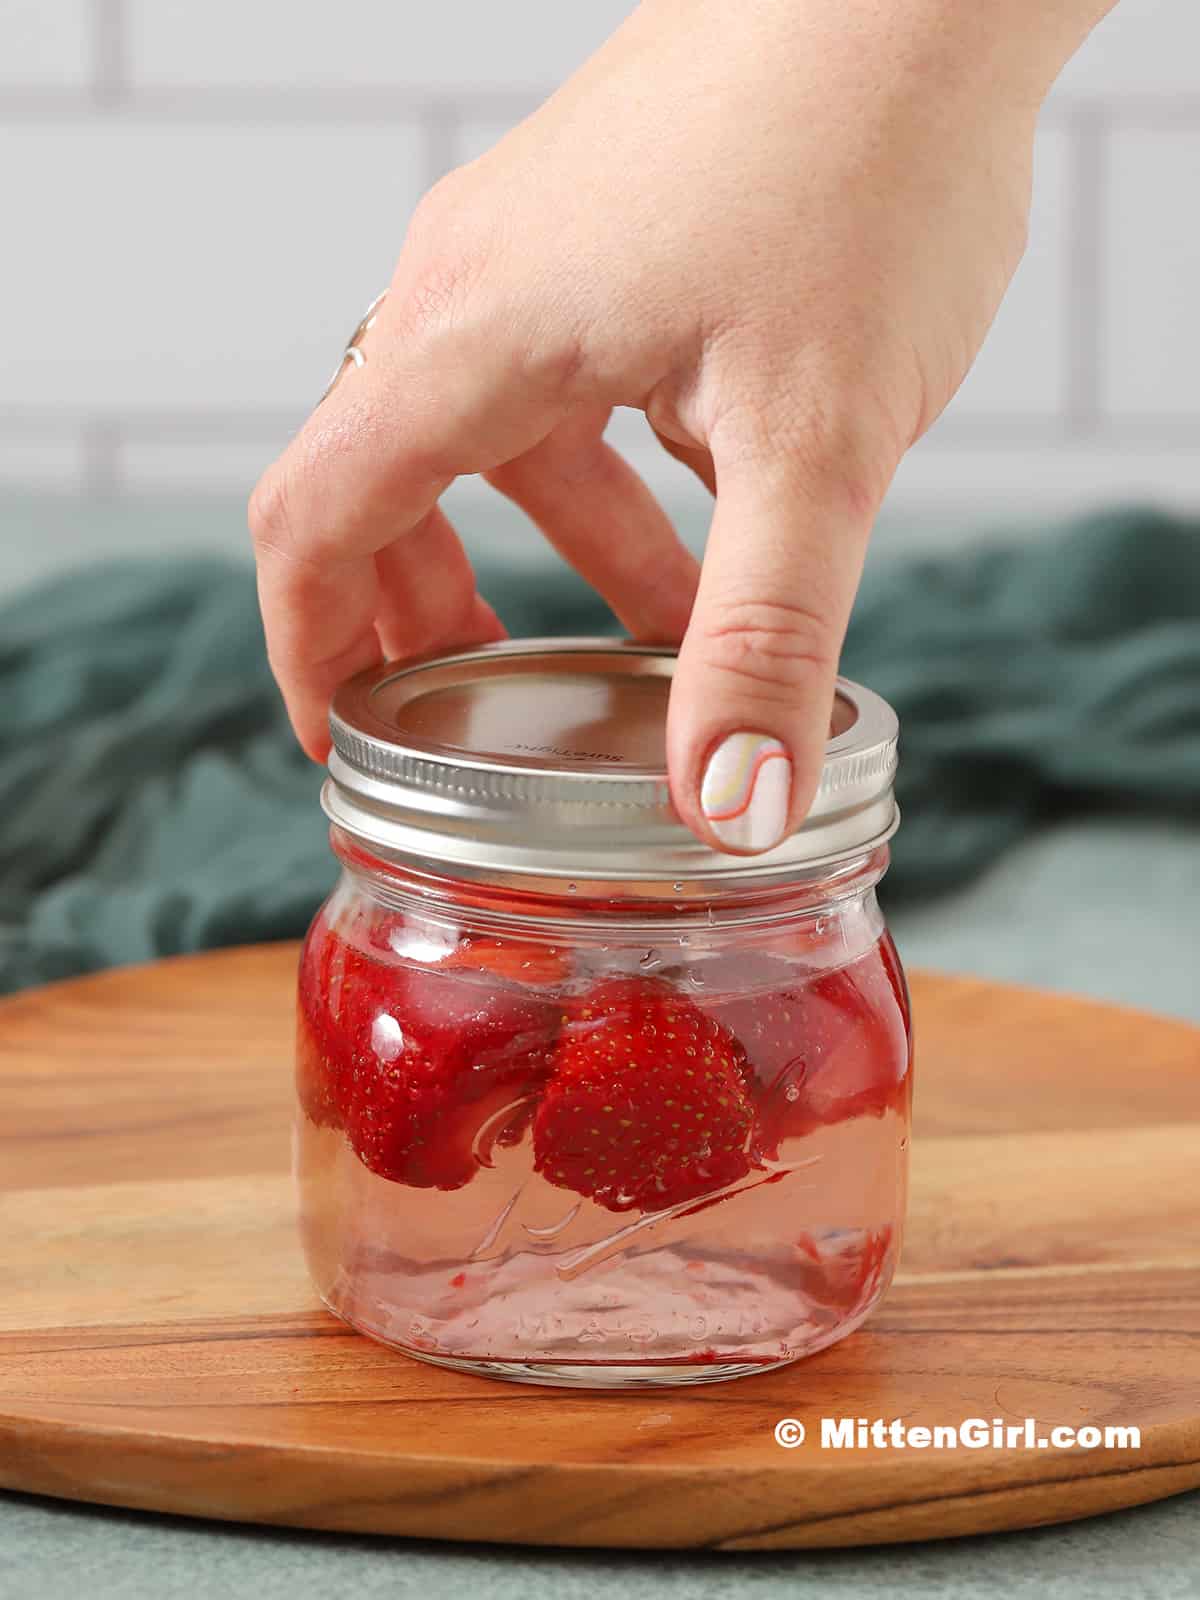 A hand screwing the lid onto a jar filled with vodka and strawberries.